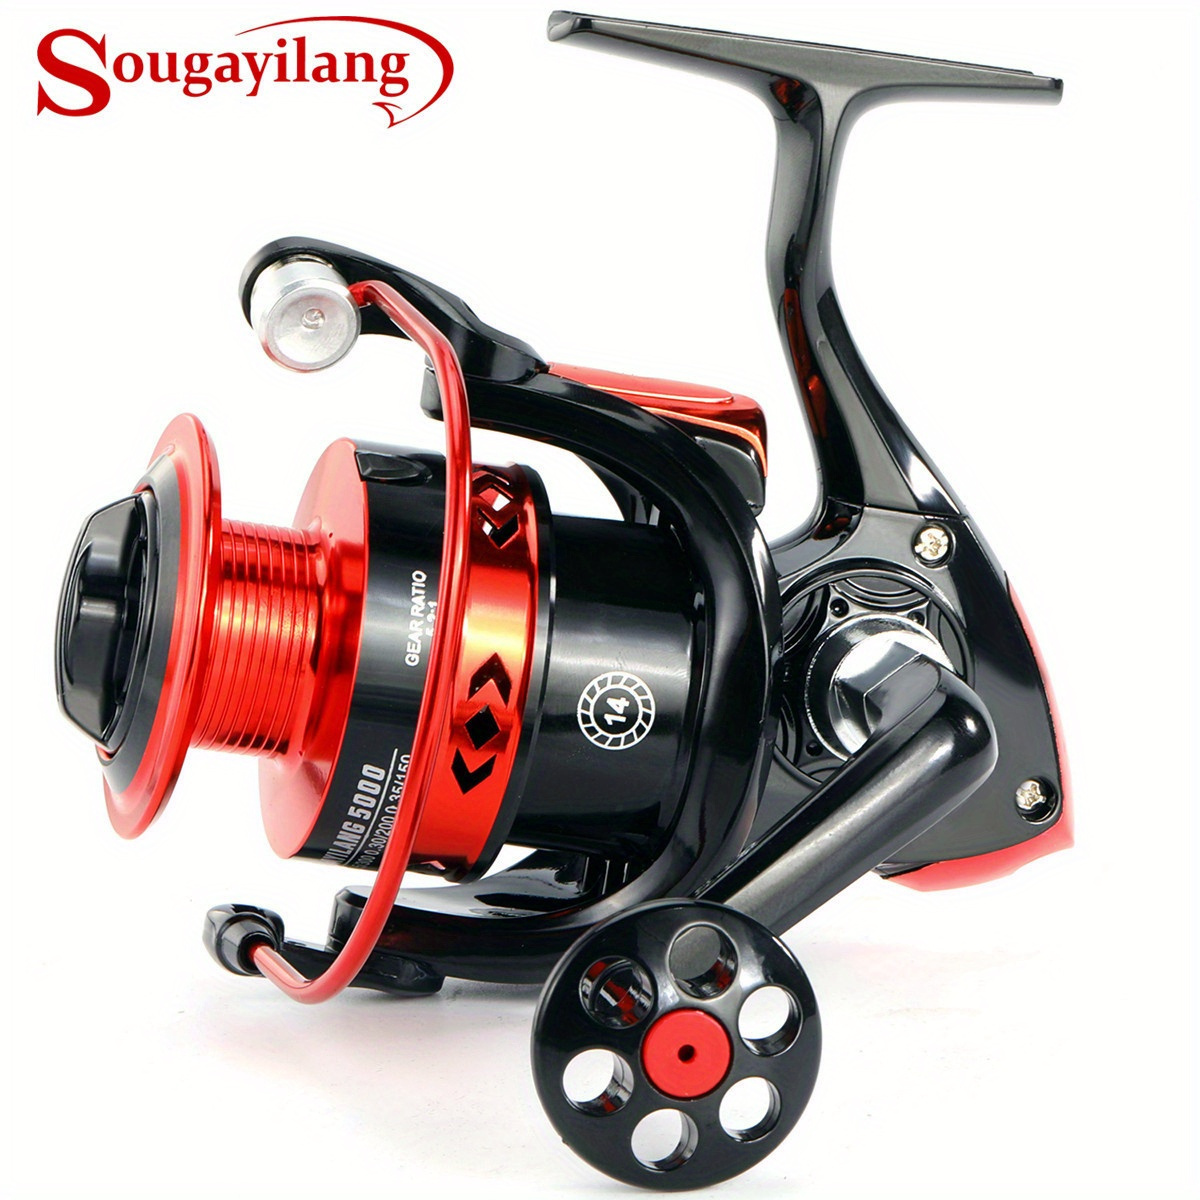 Sougayilang 1.65M 2 Sections Spinning Fishing Rod Fishing Reel Set With  3000 Series 13 Ball Bearings 5.2:1 Gear Ratio Combos Glass Fiber Pole Max  Drag 5-7kg